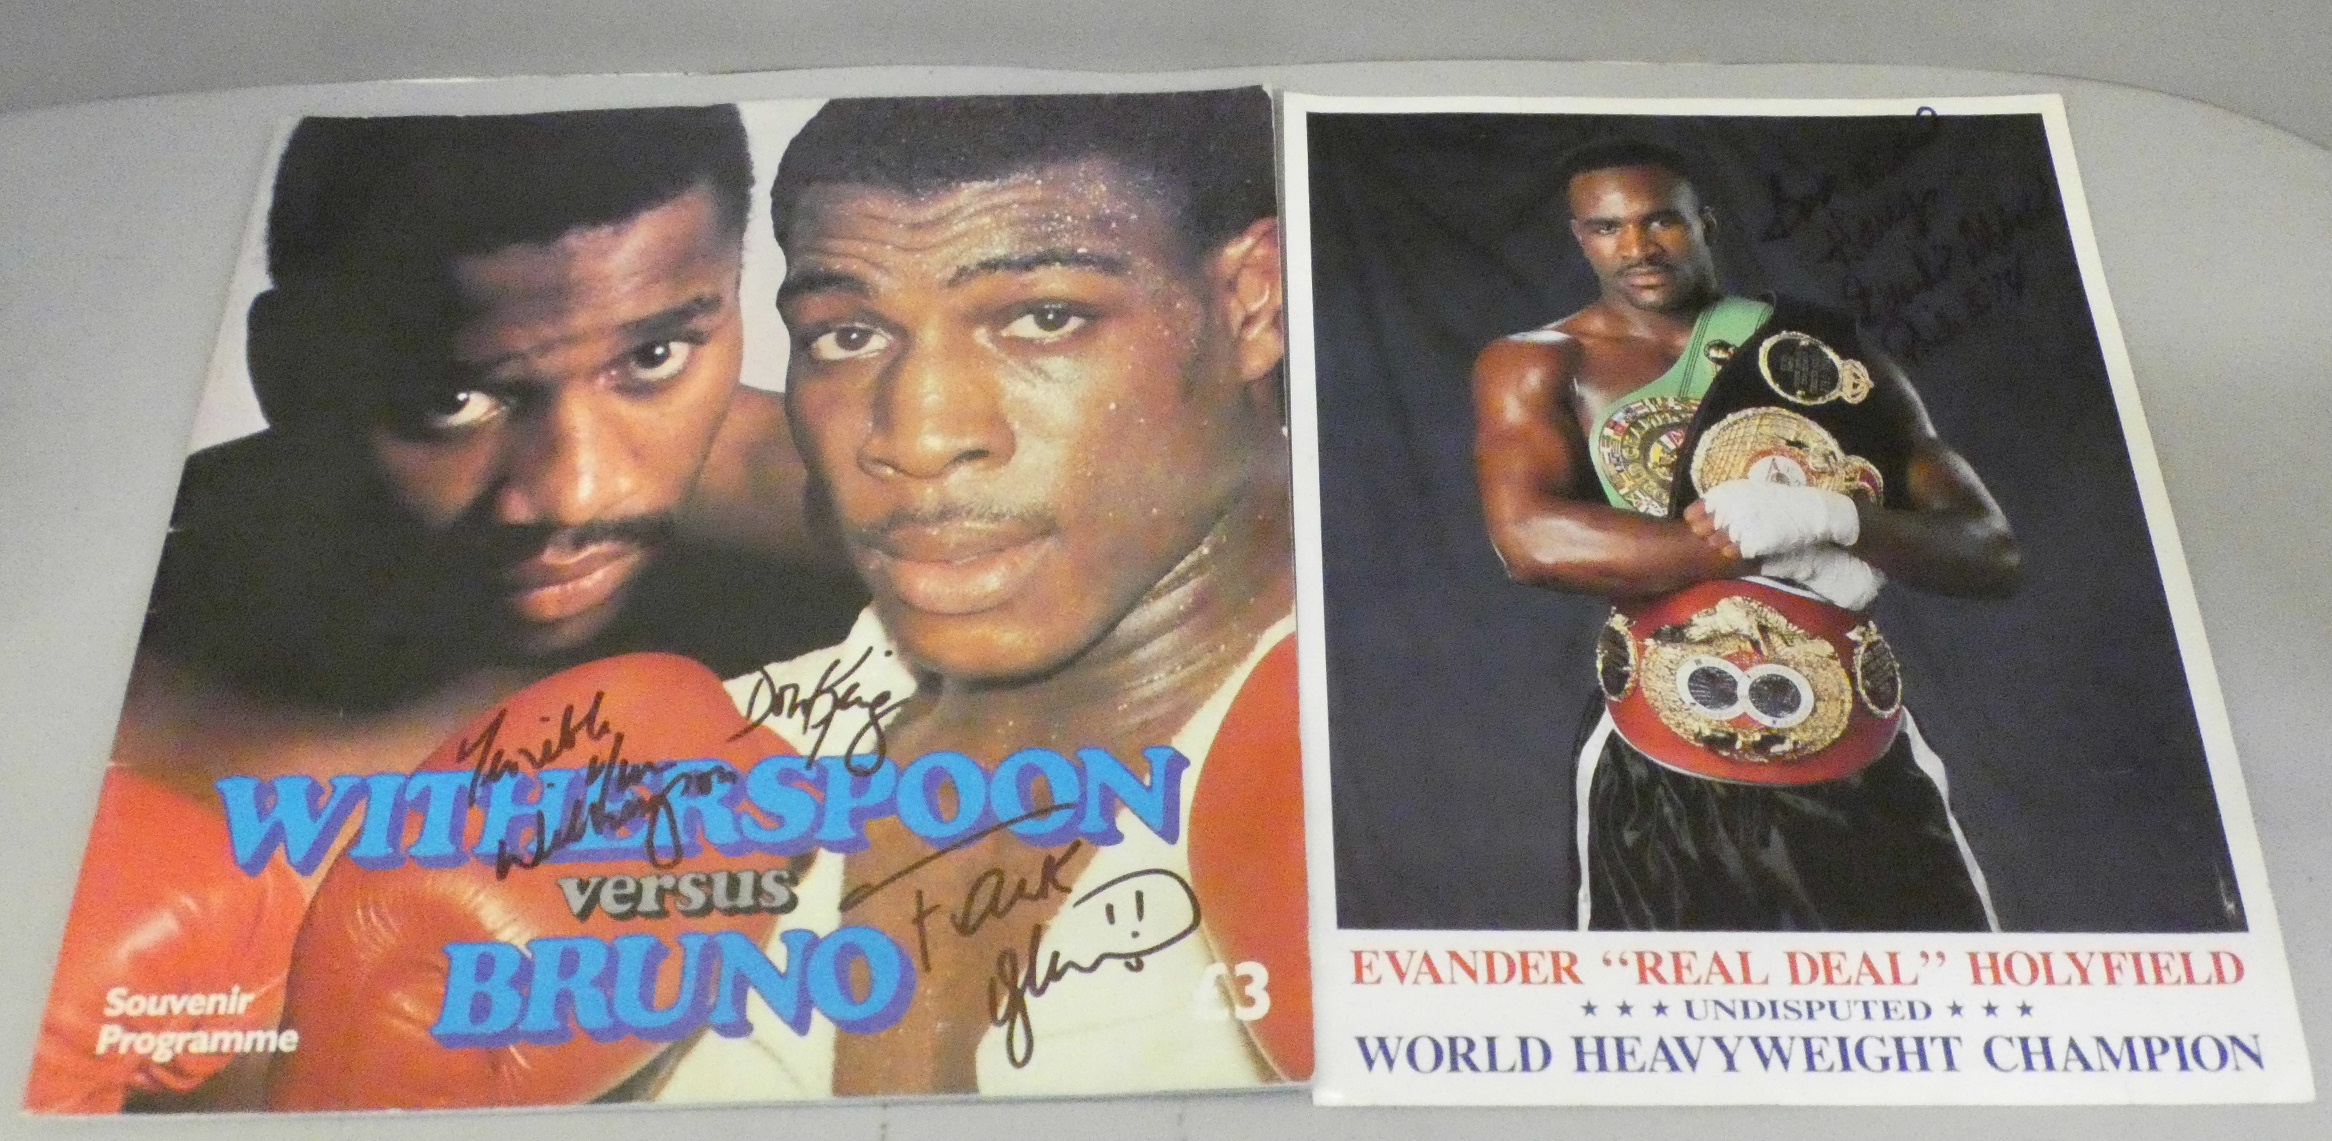 A signed Boxing programme, Don King, Frank Bruno, Tim Witherspoon and an Evander Holyfield signed